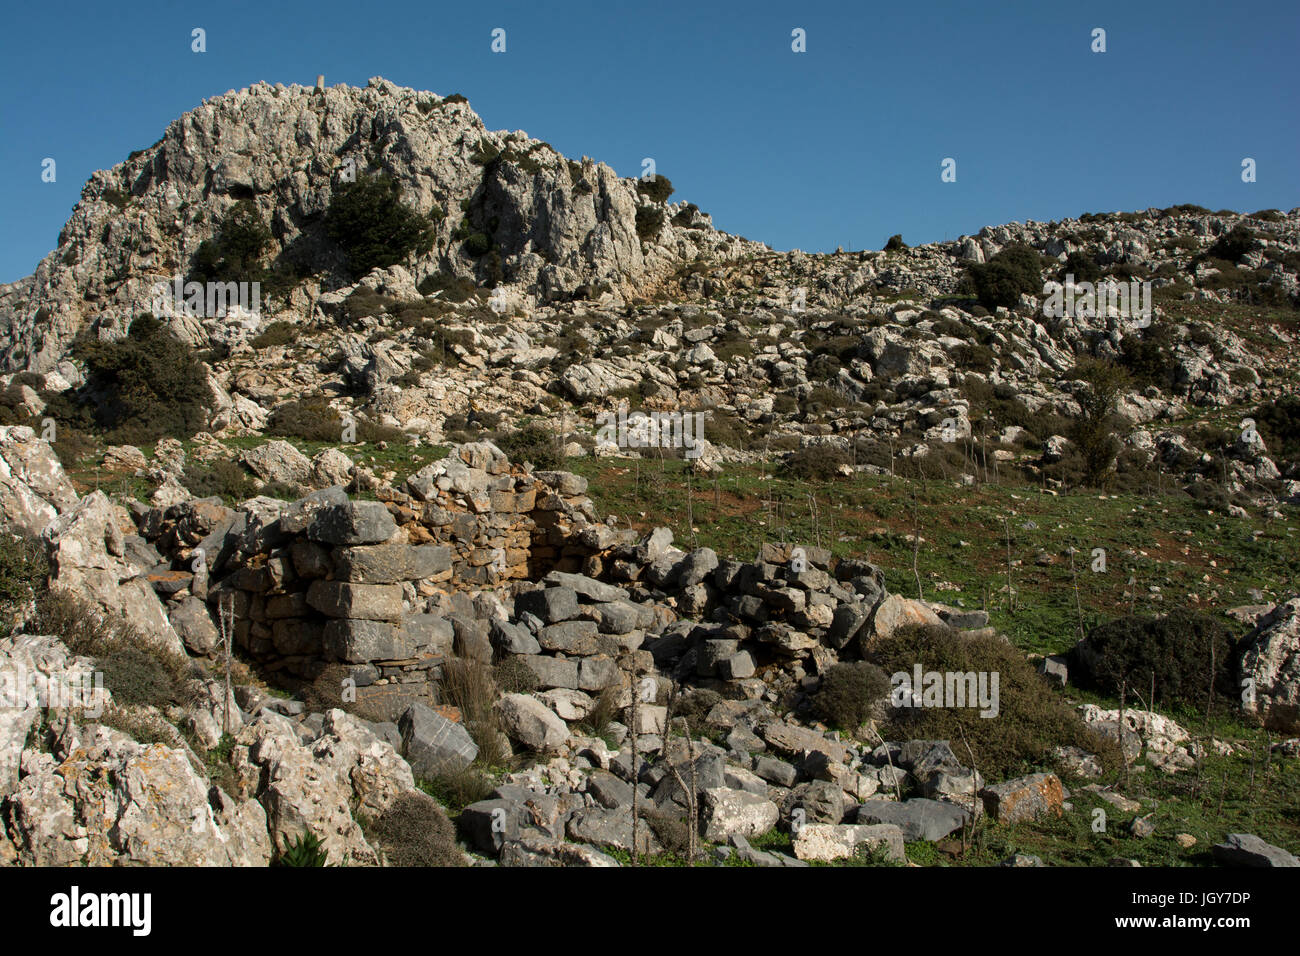 Karfi or Karphi was a Minoan settlement established 1100 BC at the end of the Minoan era 1100 meter above sea level above Lasithi Plateau in Crete- Stock Photo